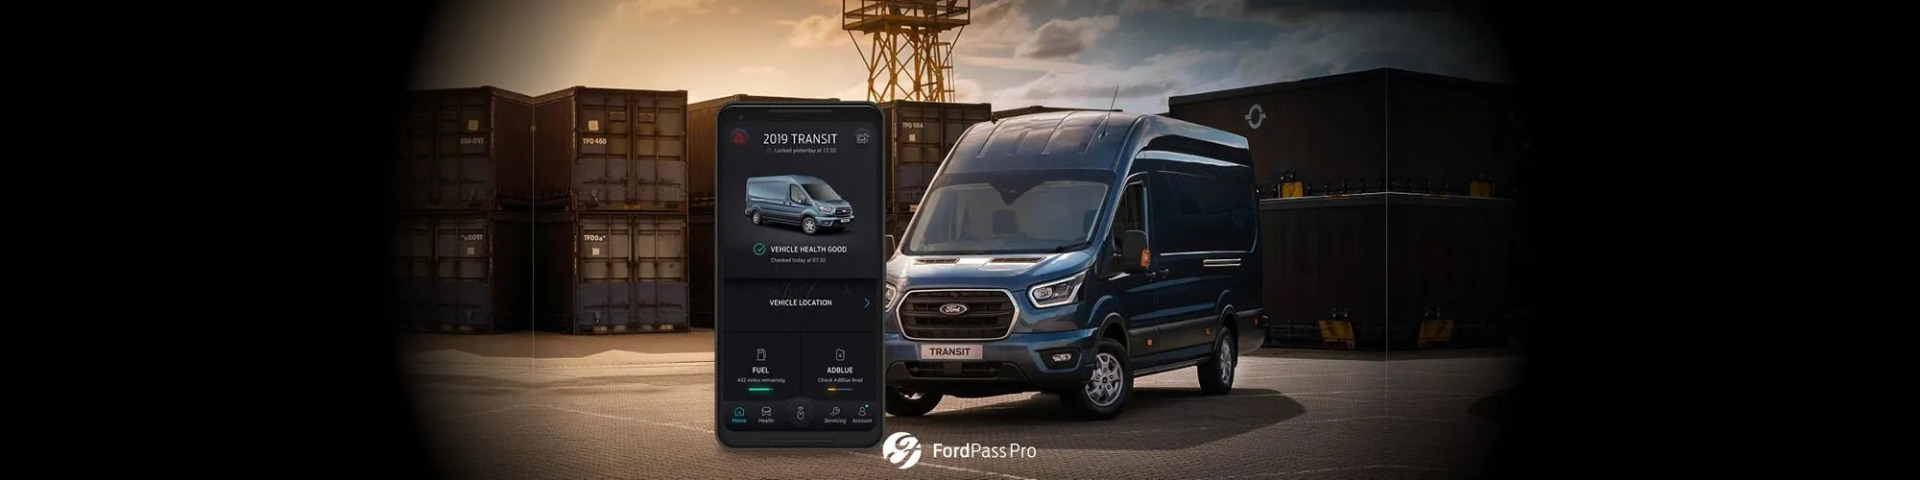 ford-pass-pro-imagery4